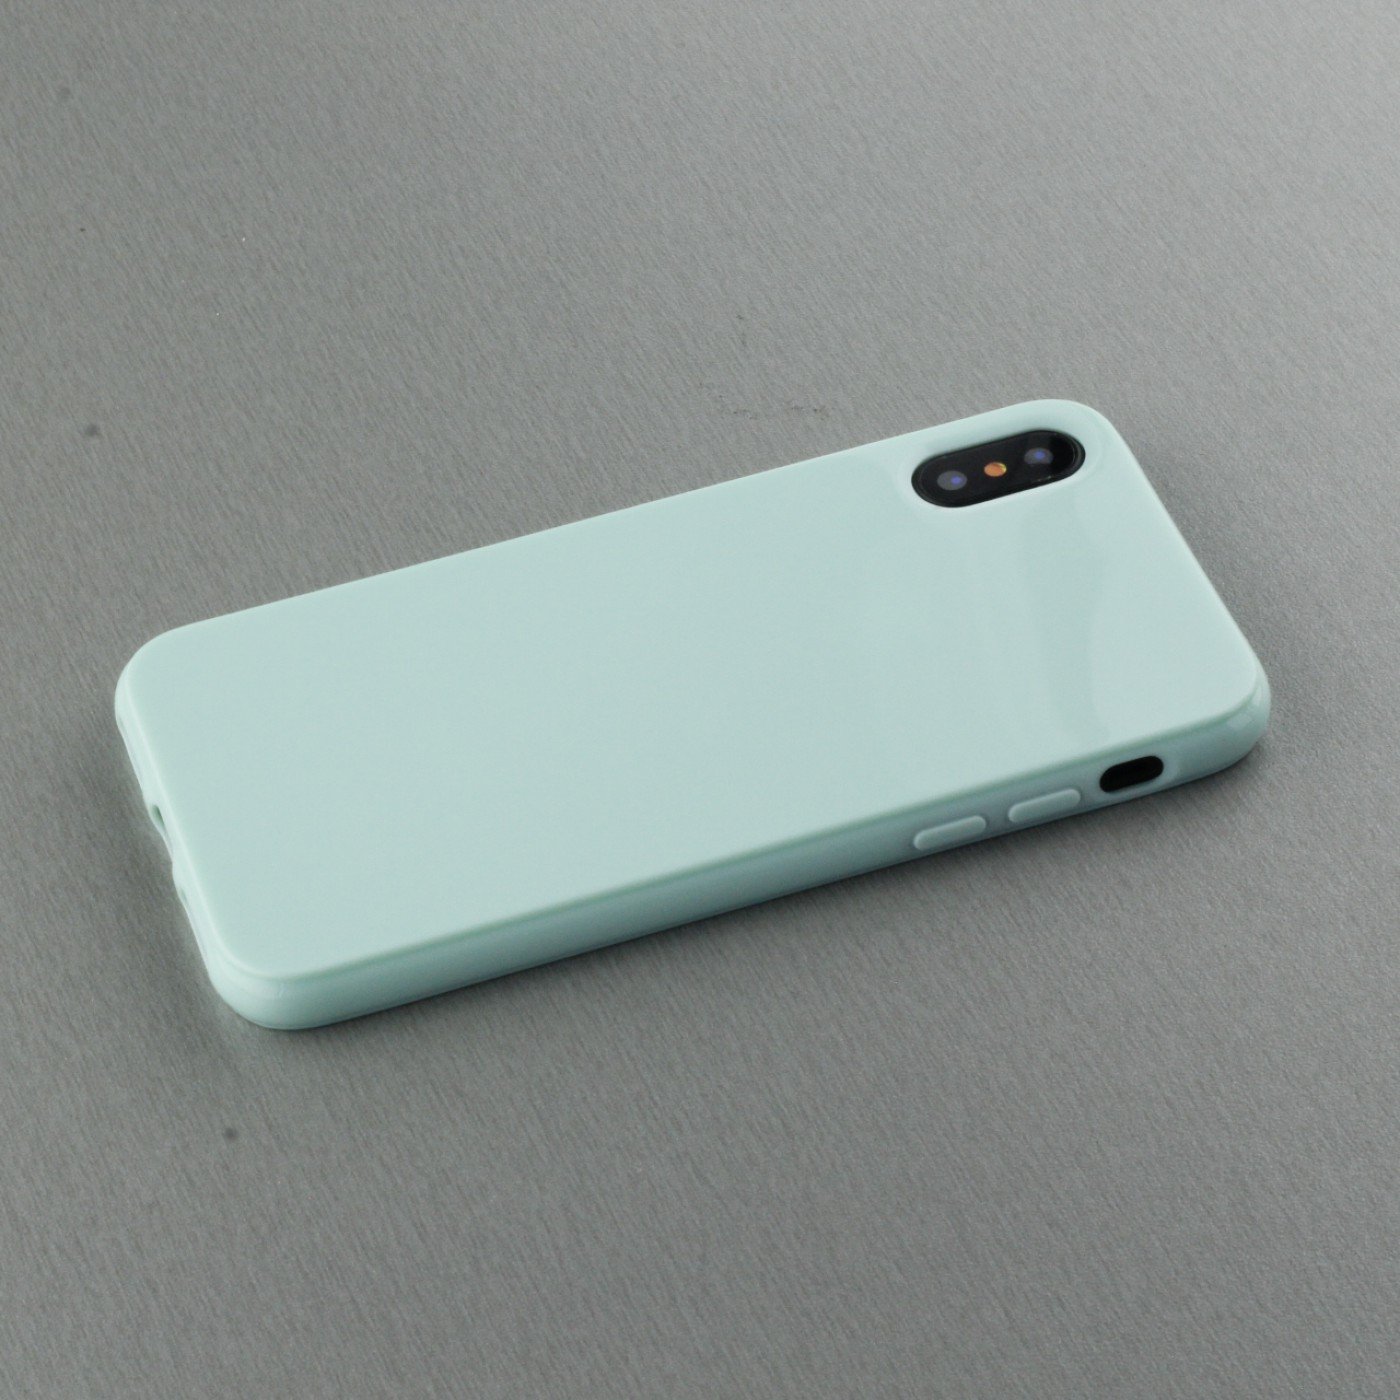 coque iphone xr silicone menthe